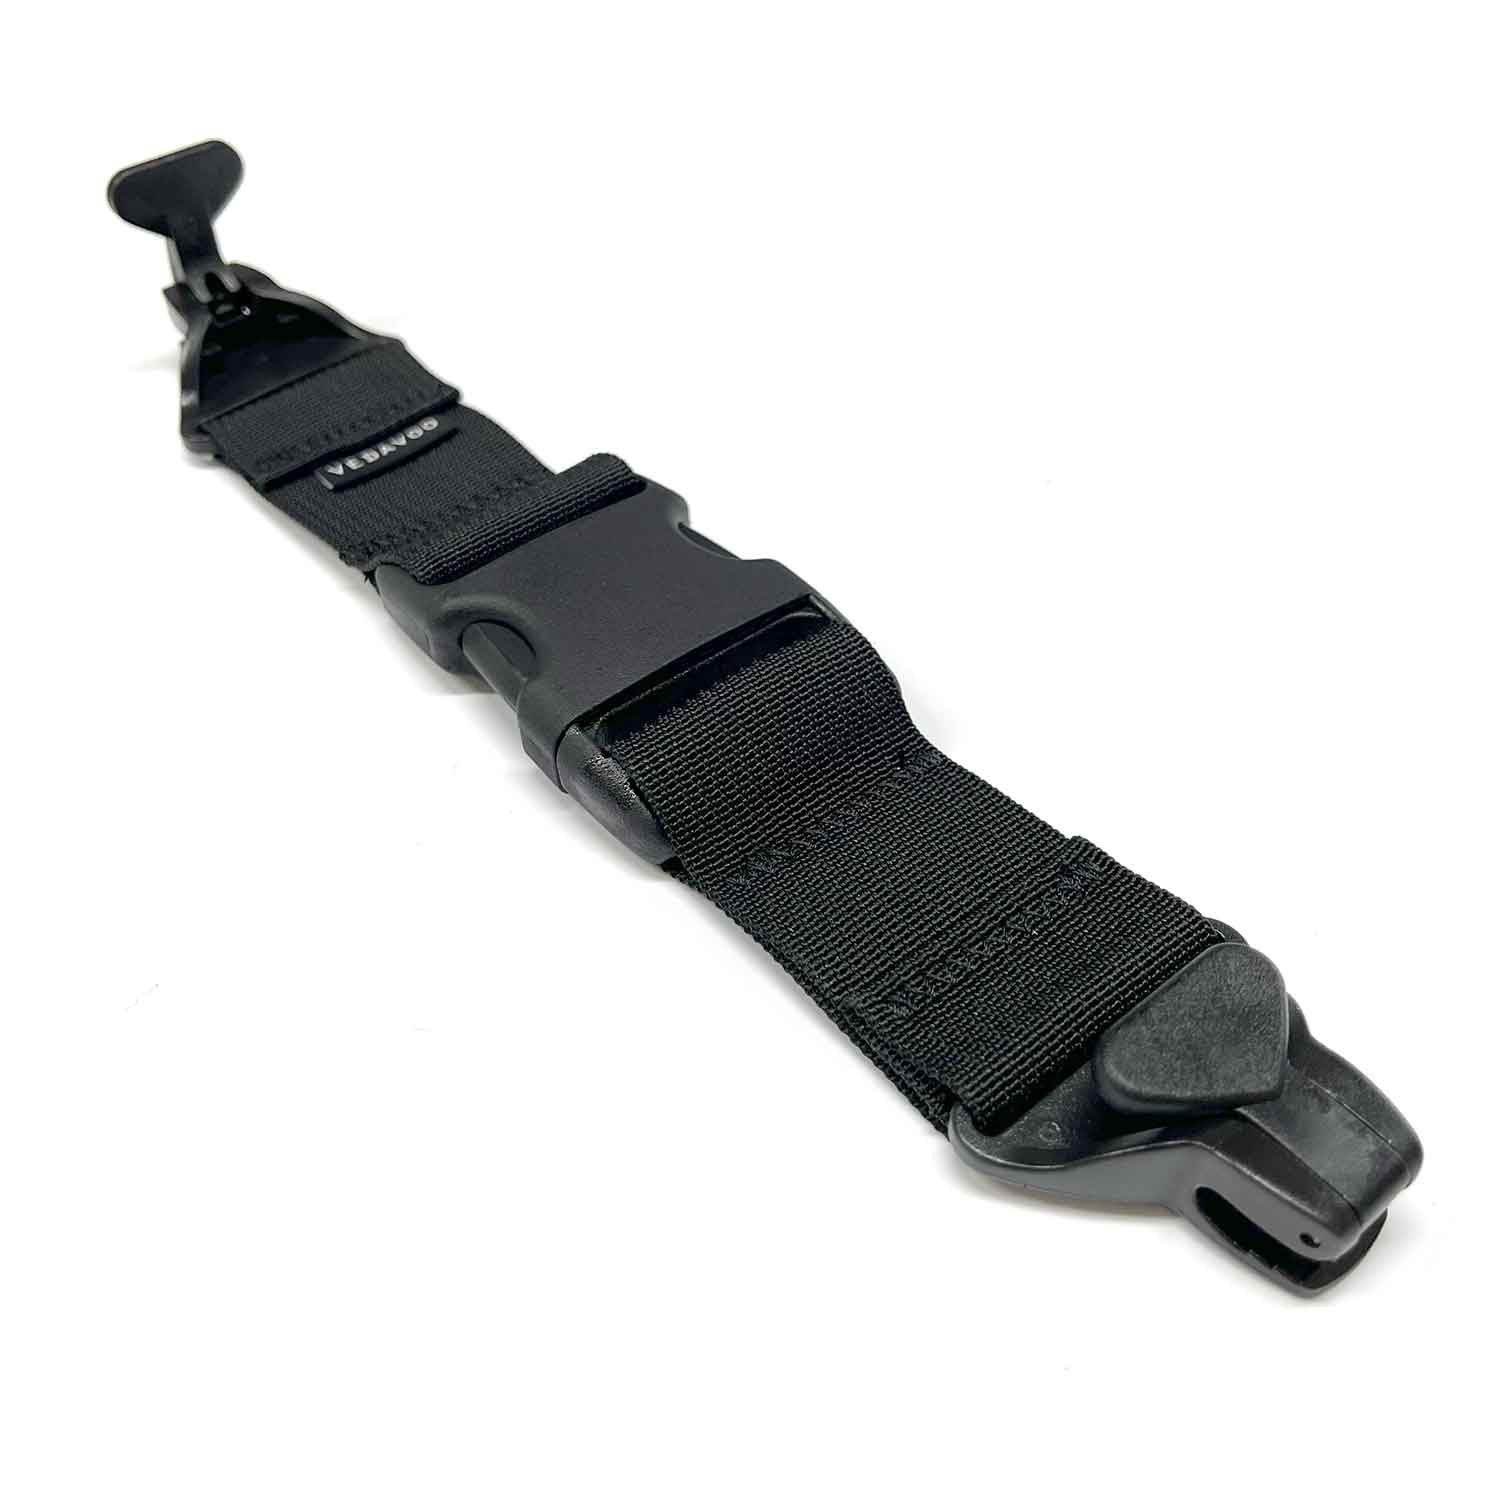 New Waist Buckle Clip Strap Replacement Part for Camelback